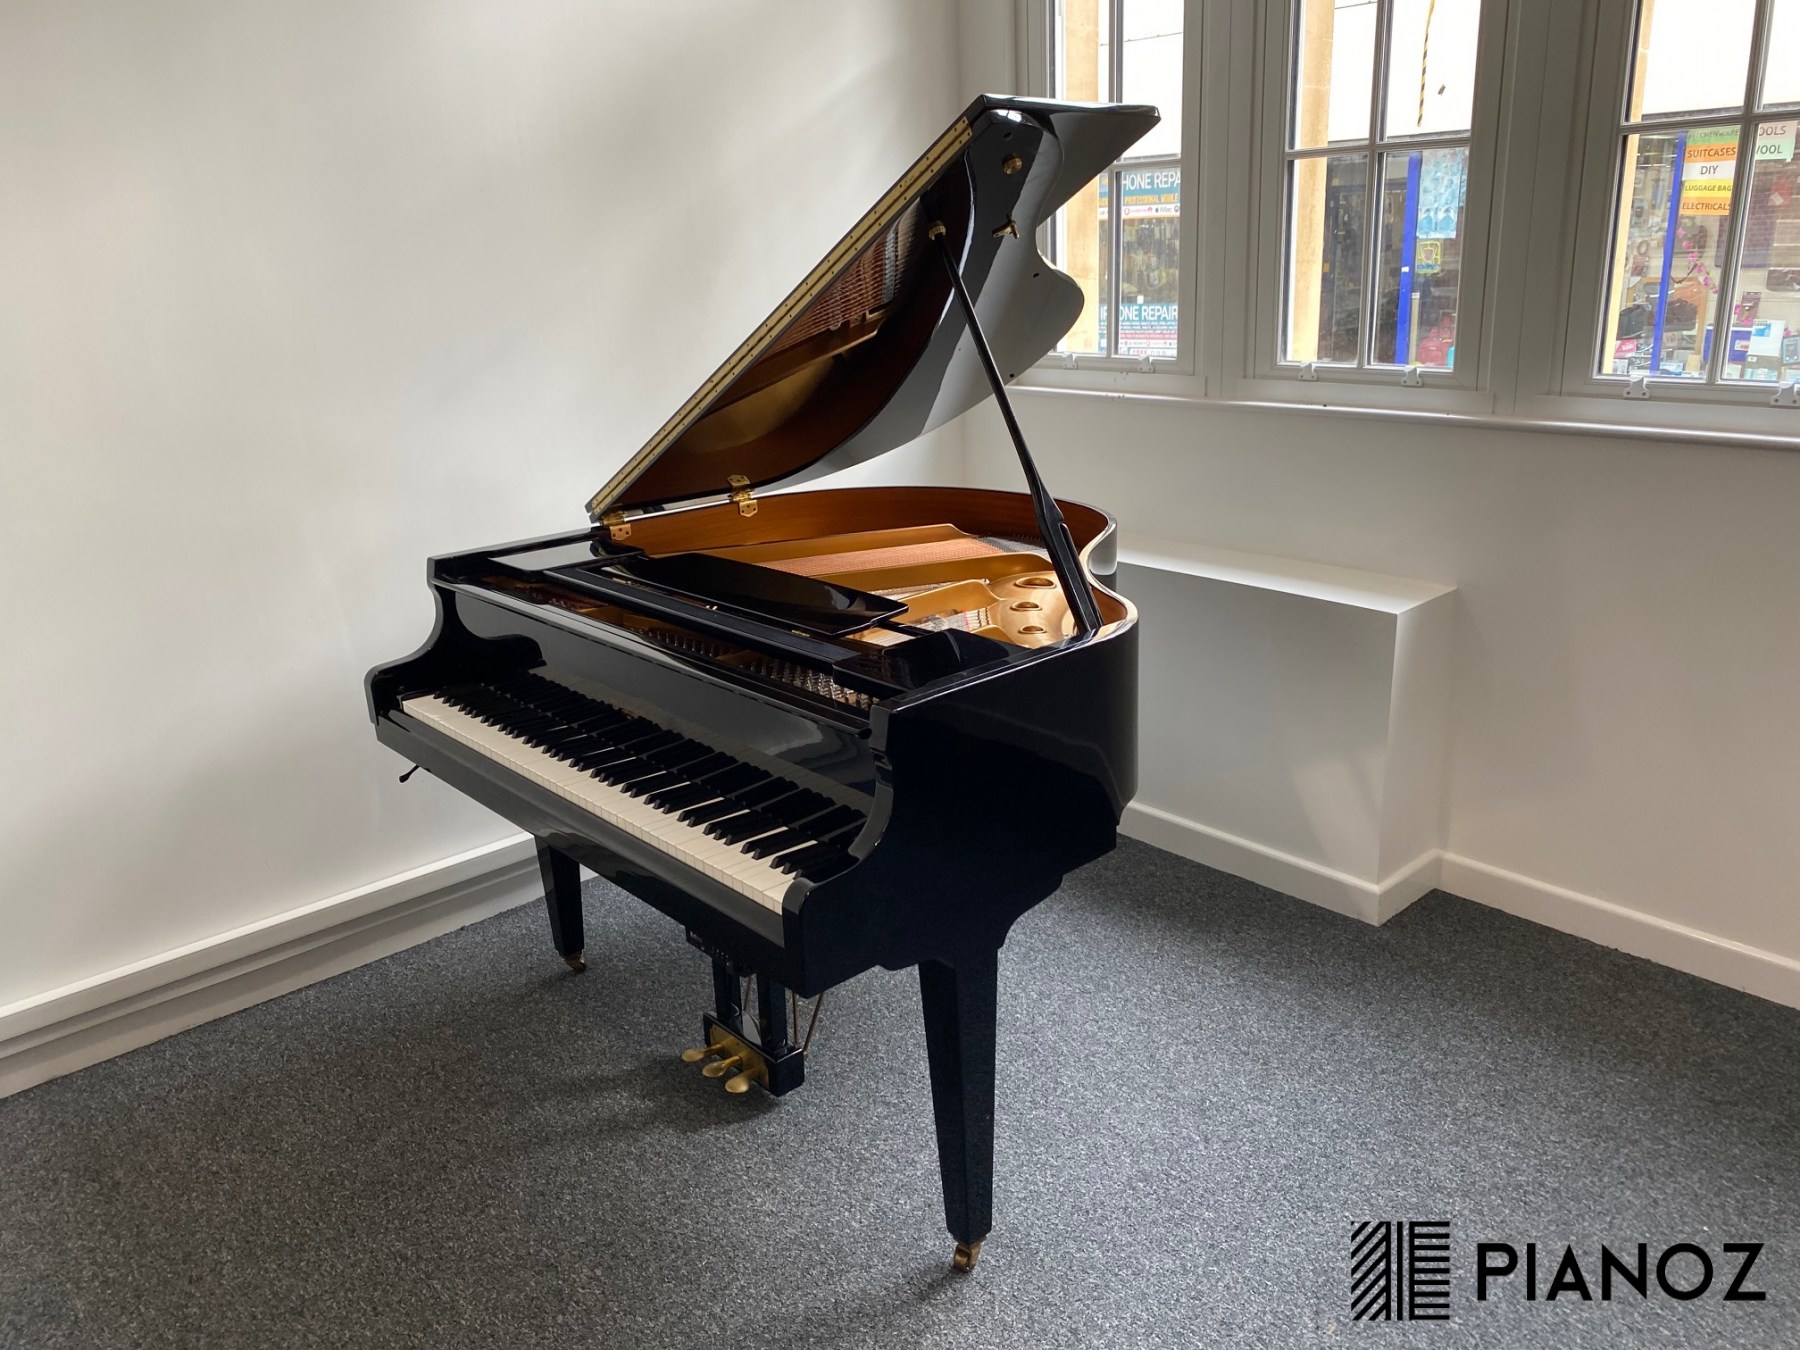 Broadwood Silent System Baby Grand Piano piano for sale in UK